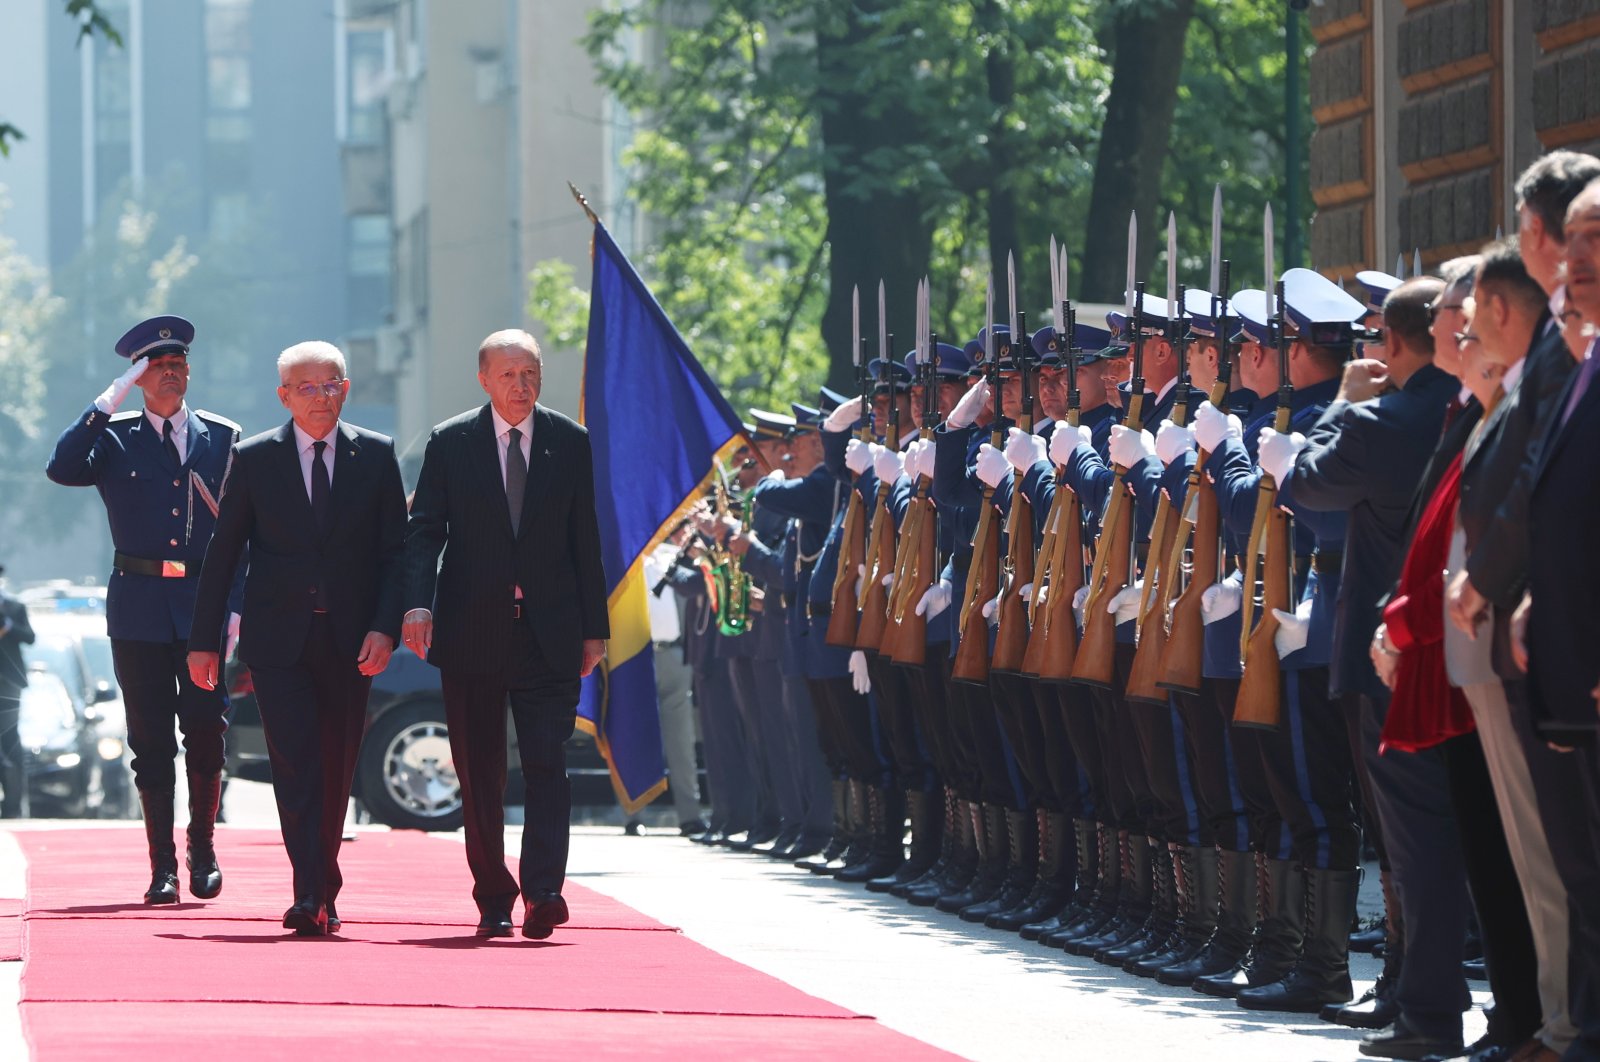 Chair of the Presidency of Bosnia-Herzegovina Sefik Dzaferovic (2nd L) and President Recep Tayyip Erdoğan review the honor guard during a welcoming ceremony in Sarajevo, Bosnia-Herzegovina, Sept. 6, 2022. (AA Photo)